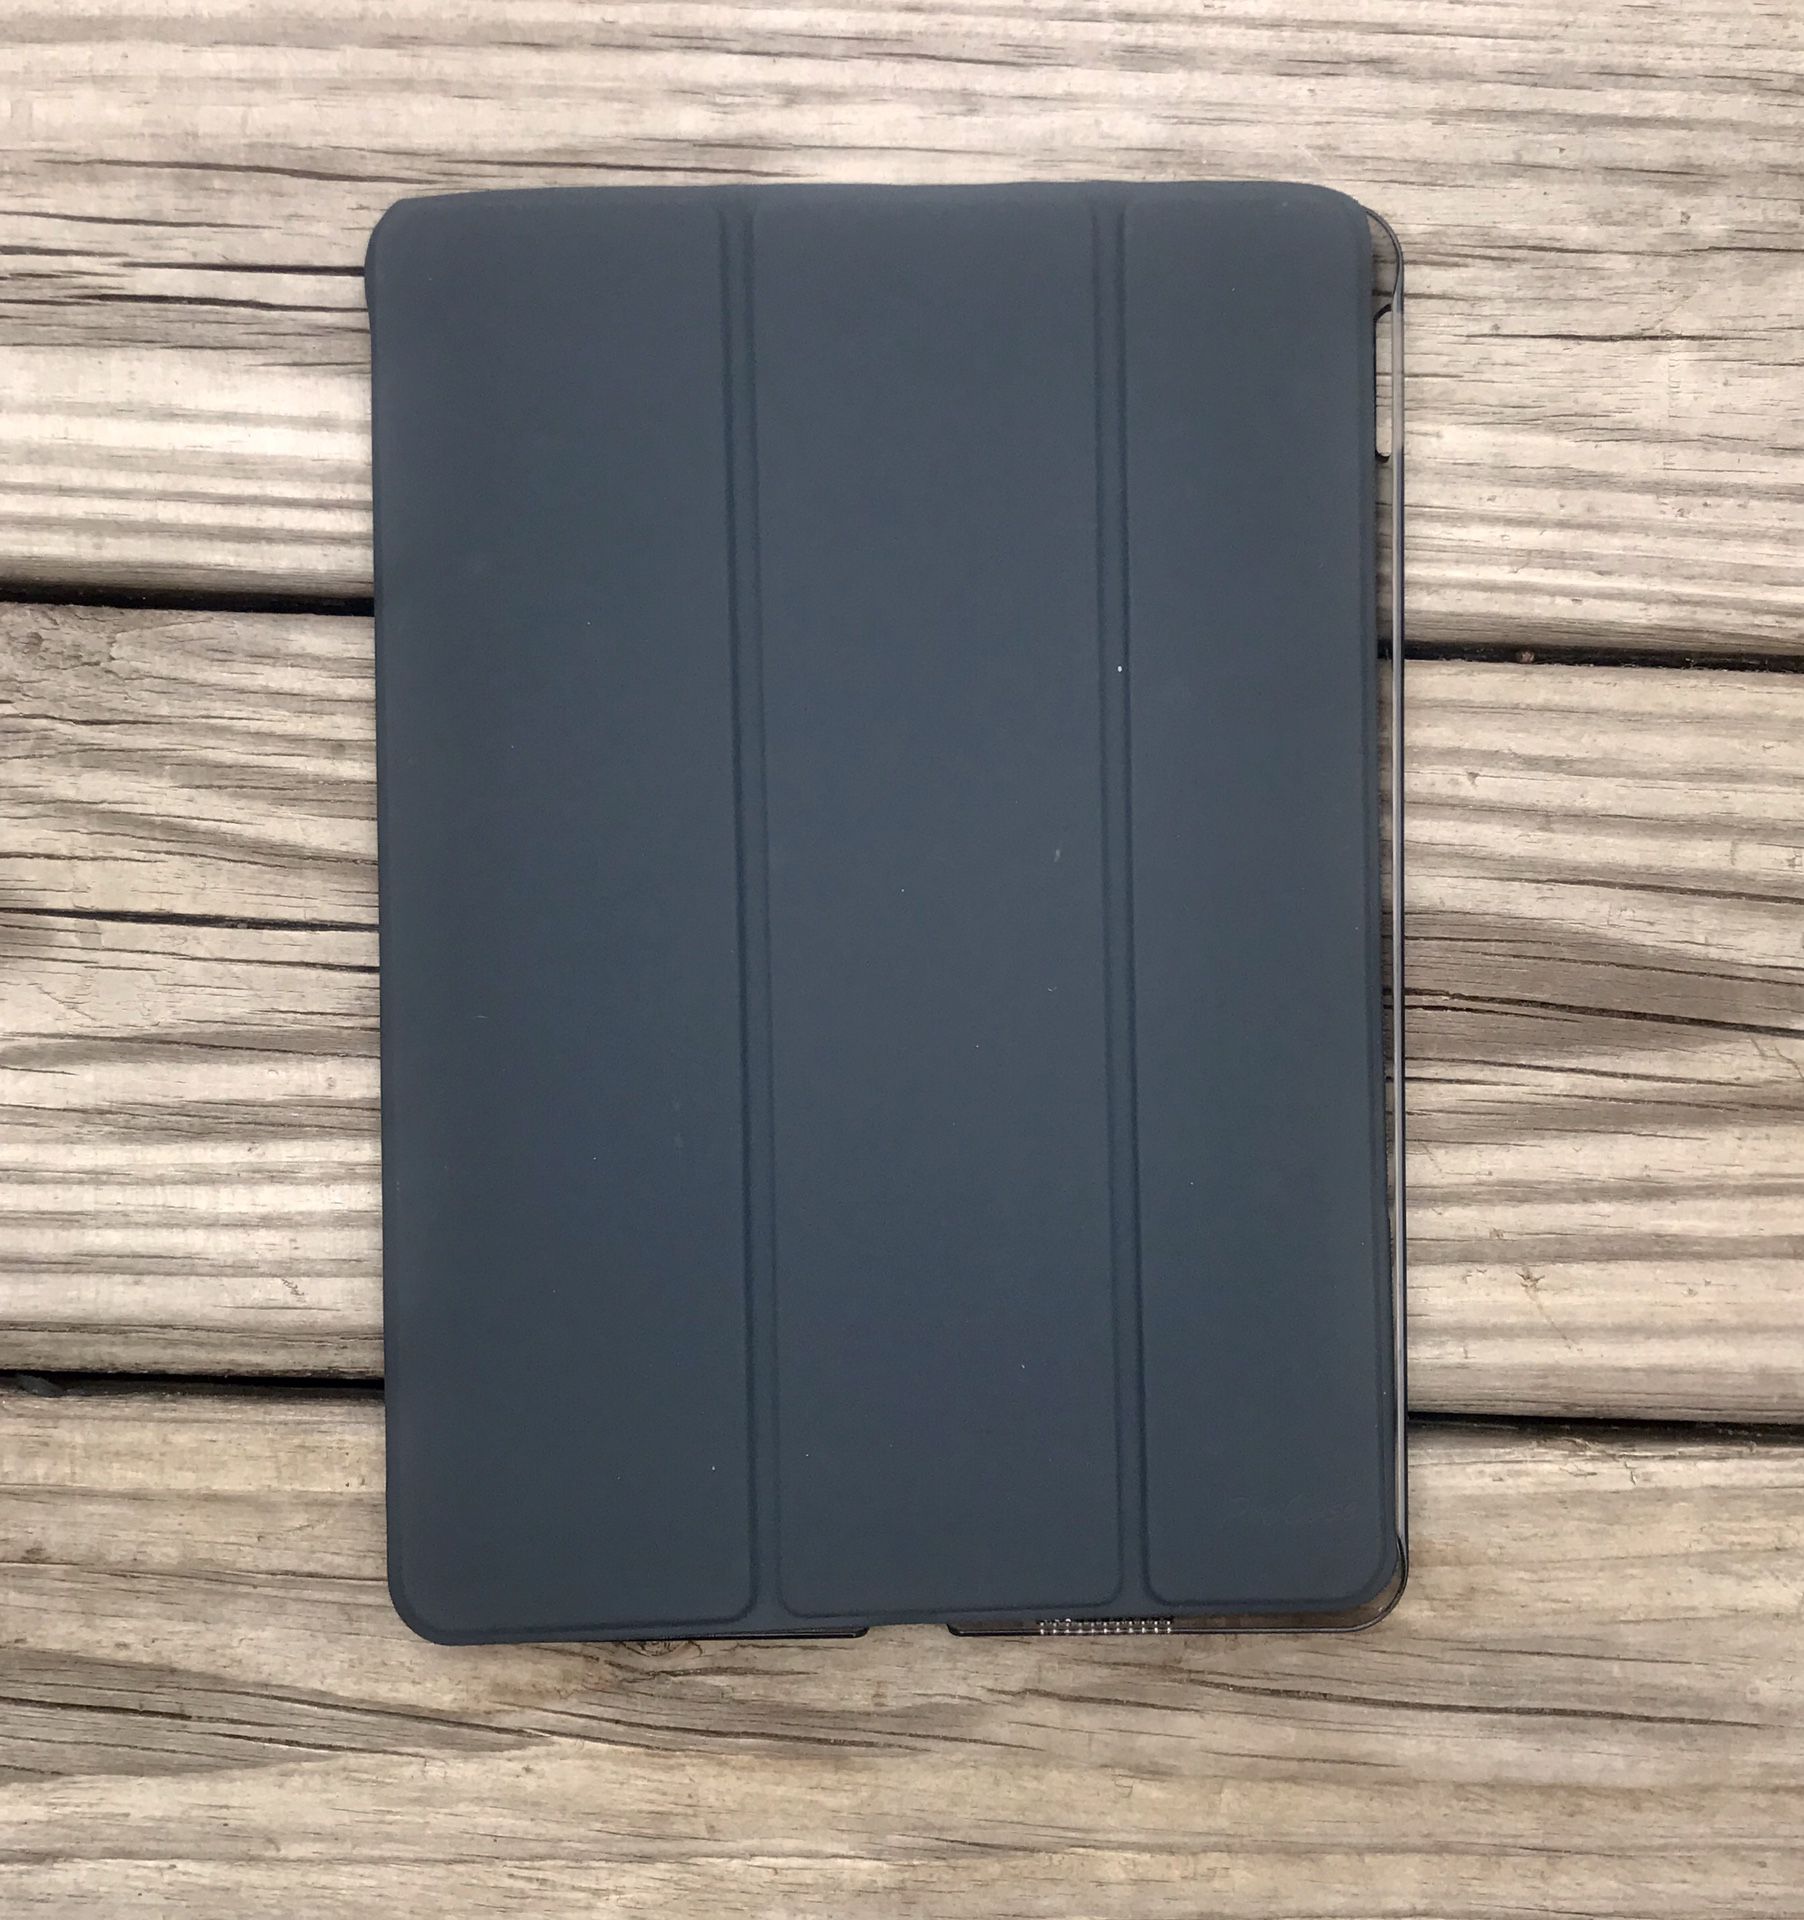 Pro Case For IPad Air 3